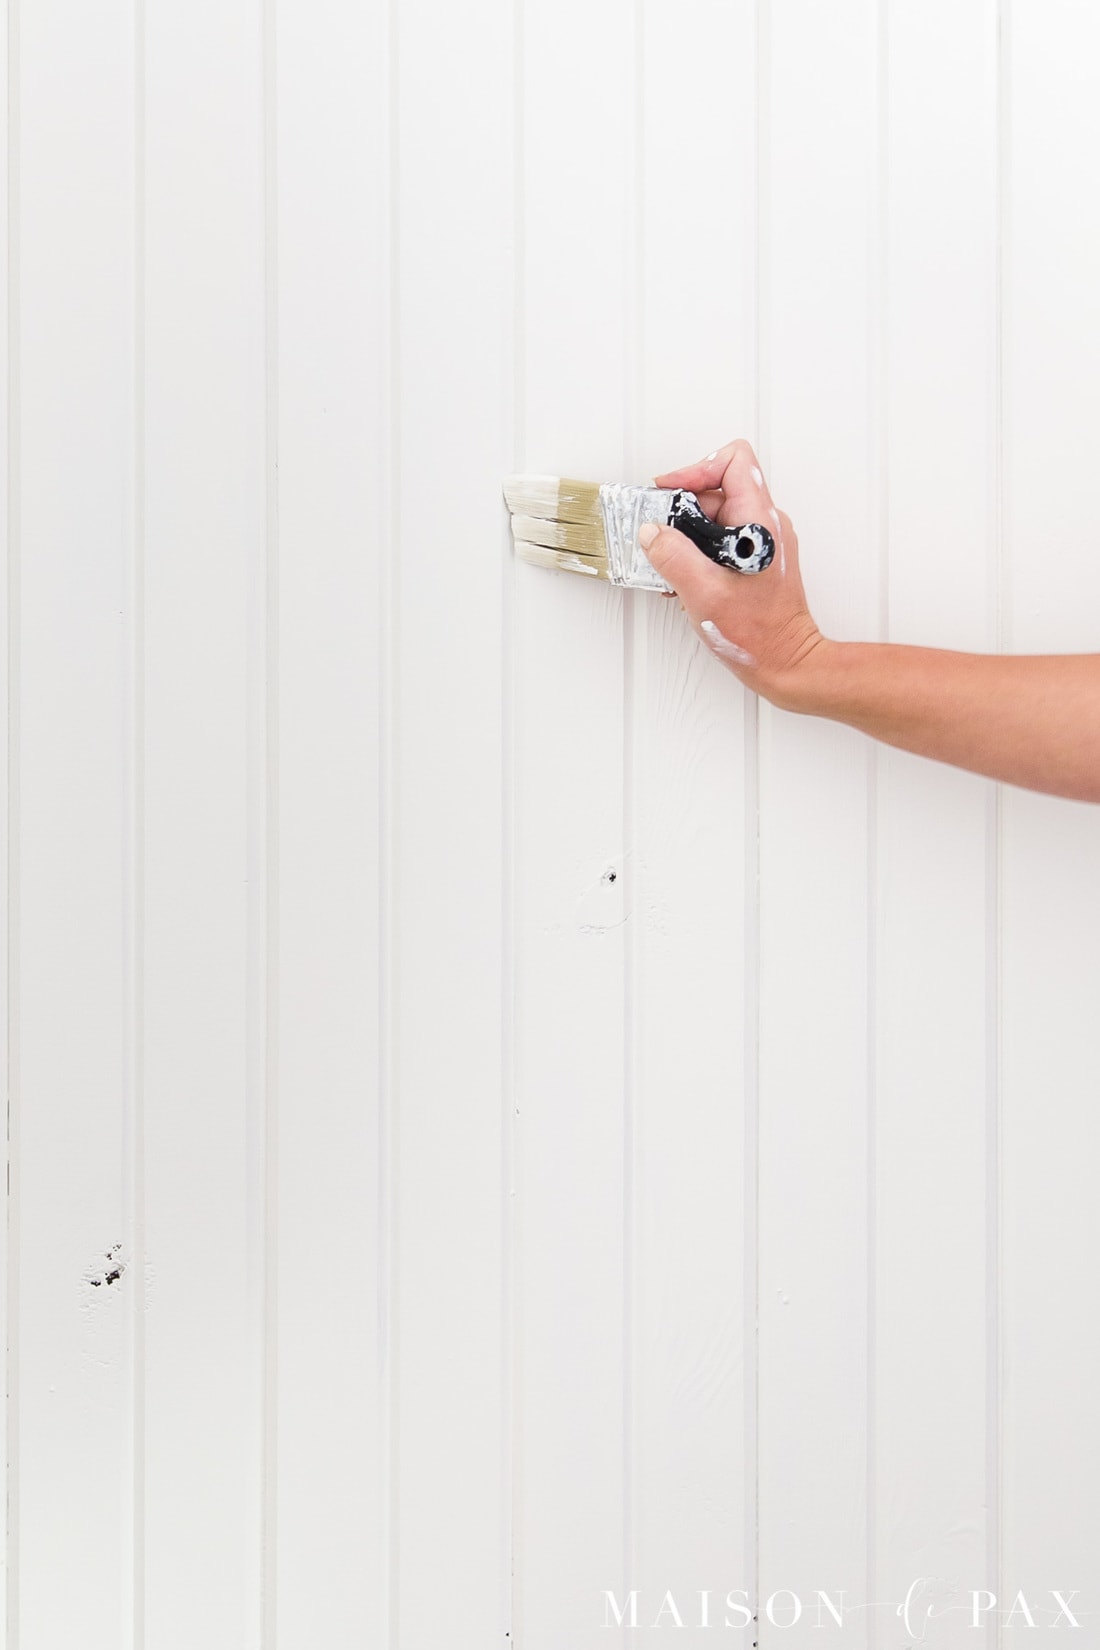 How to Paint Wood Paneling